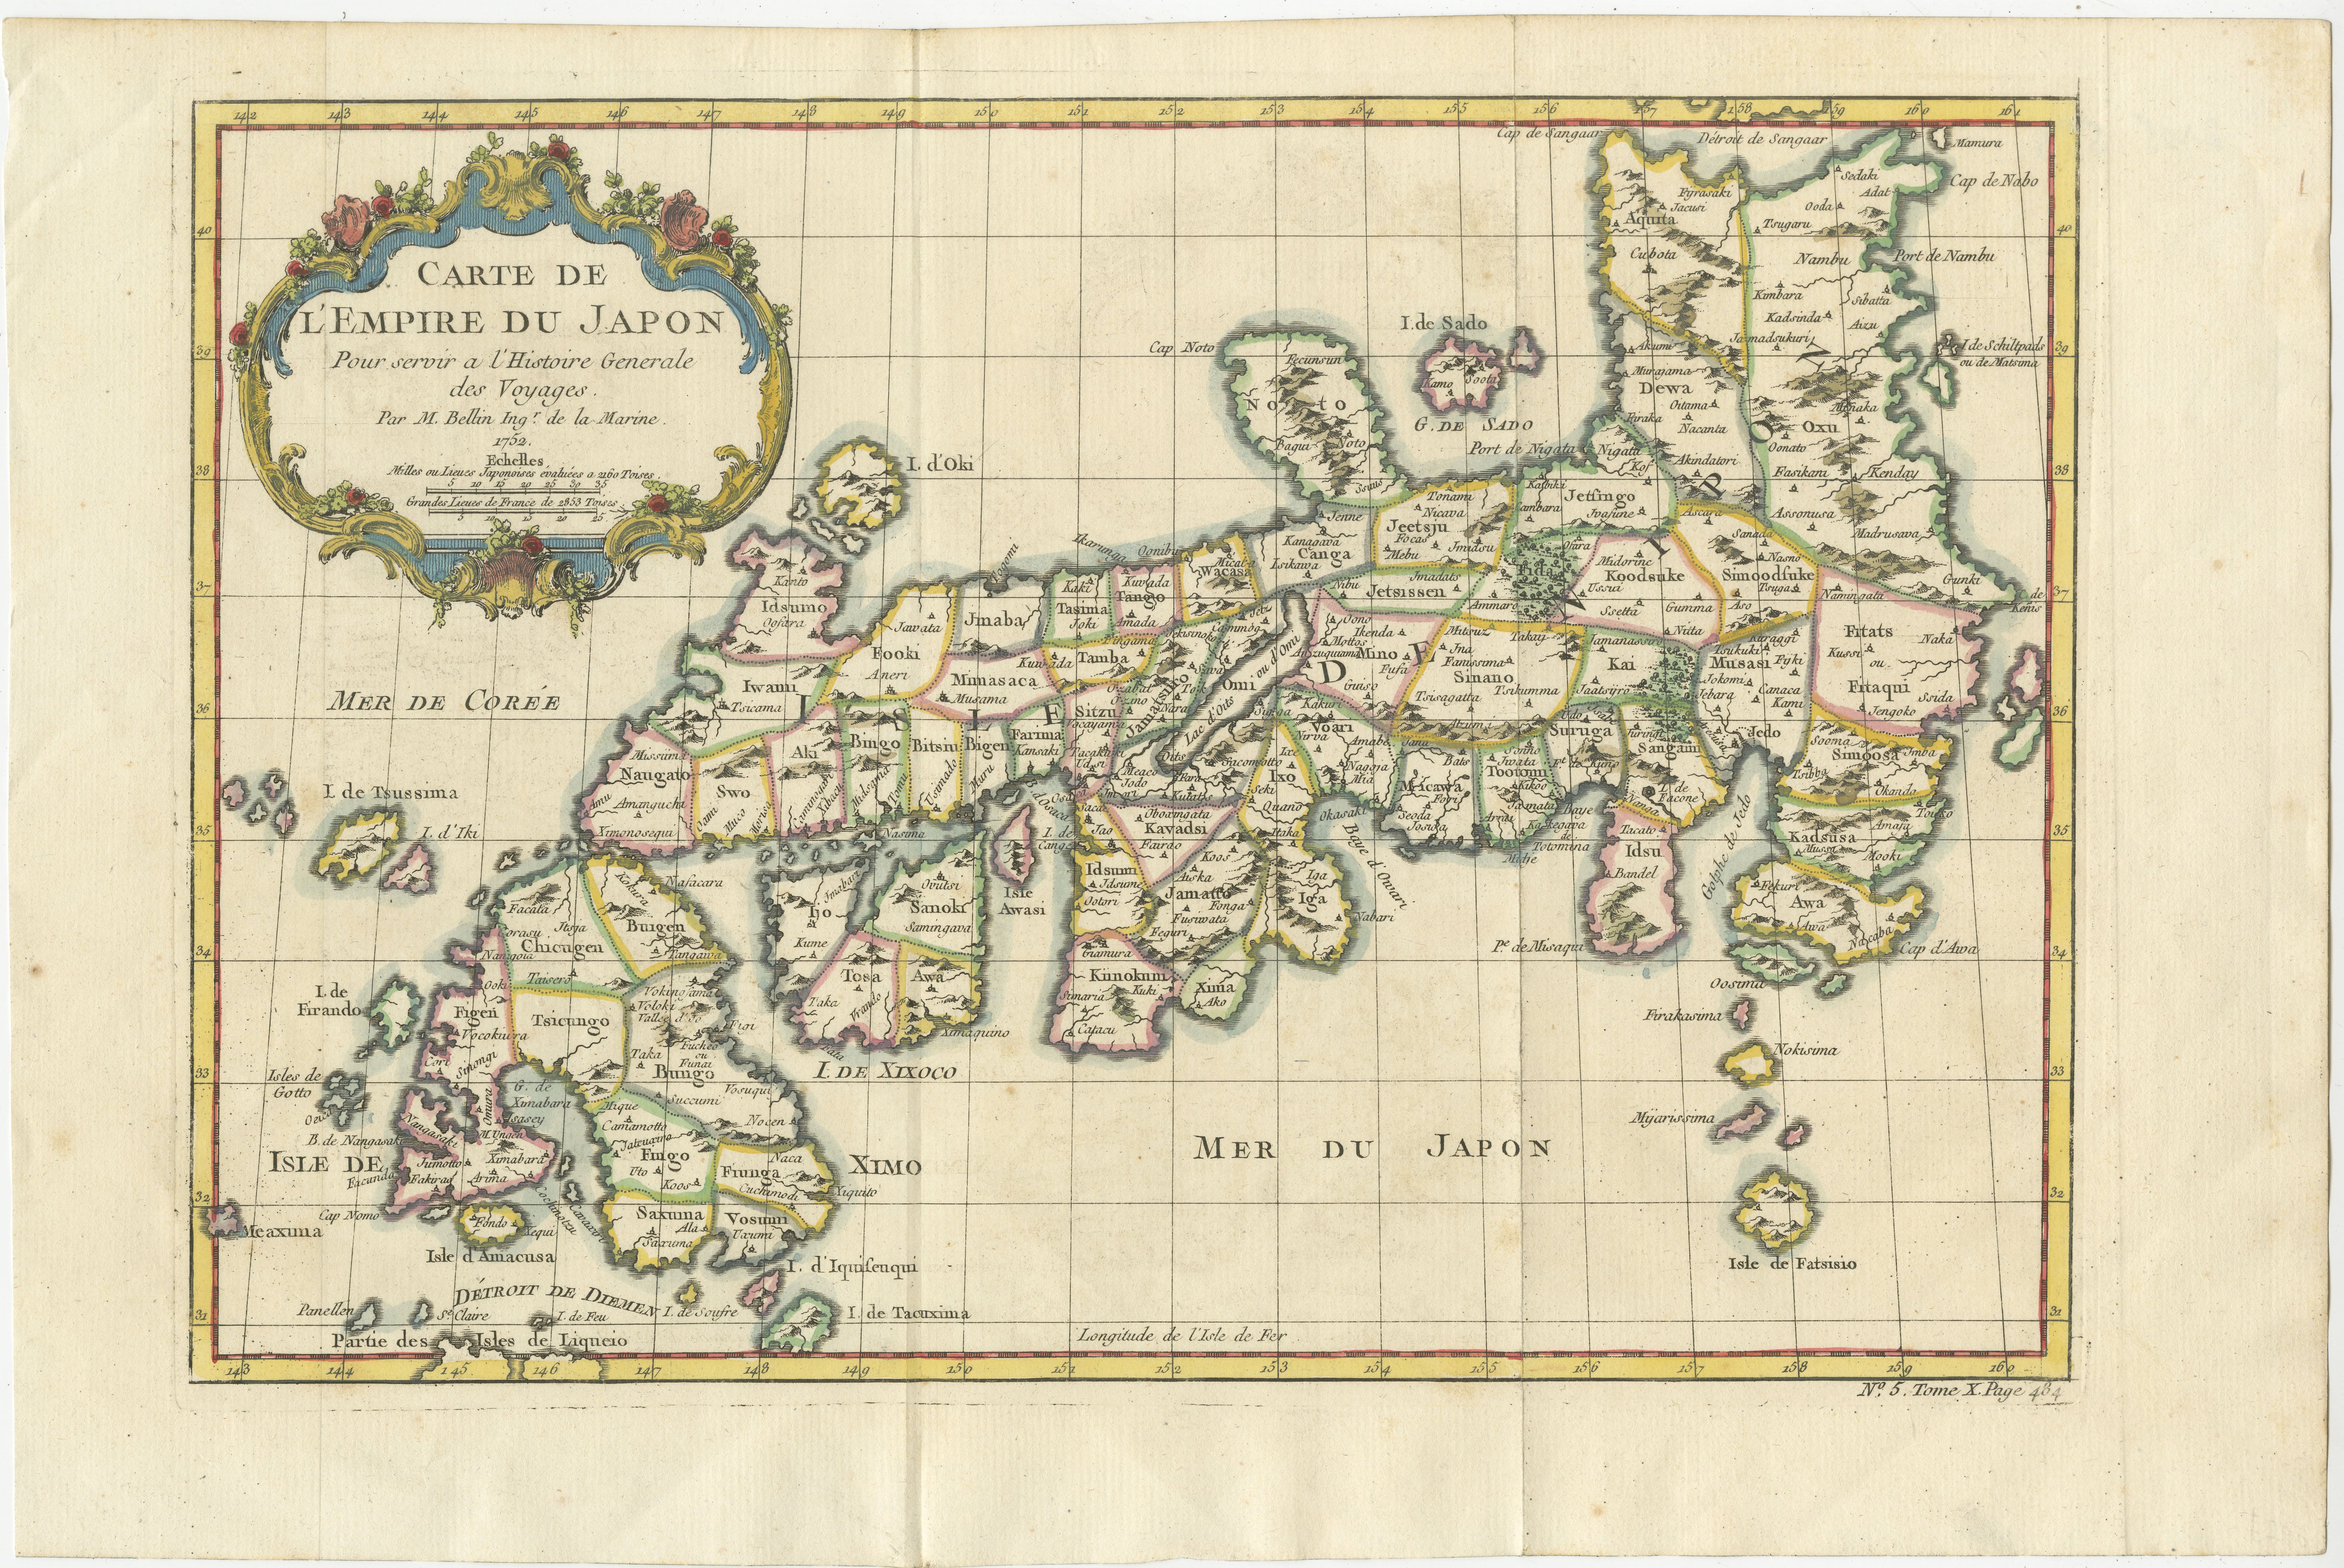 Nice decorative hand tinted map of Japan with the title (in French): Carte de L'Empire du Japon Bellin, 1752

This antique map is engraved with very attractive title cartouche.

The map shows the old names of the islands included, towns,